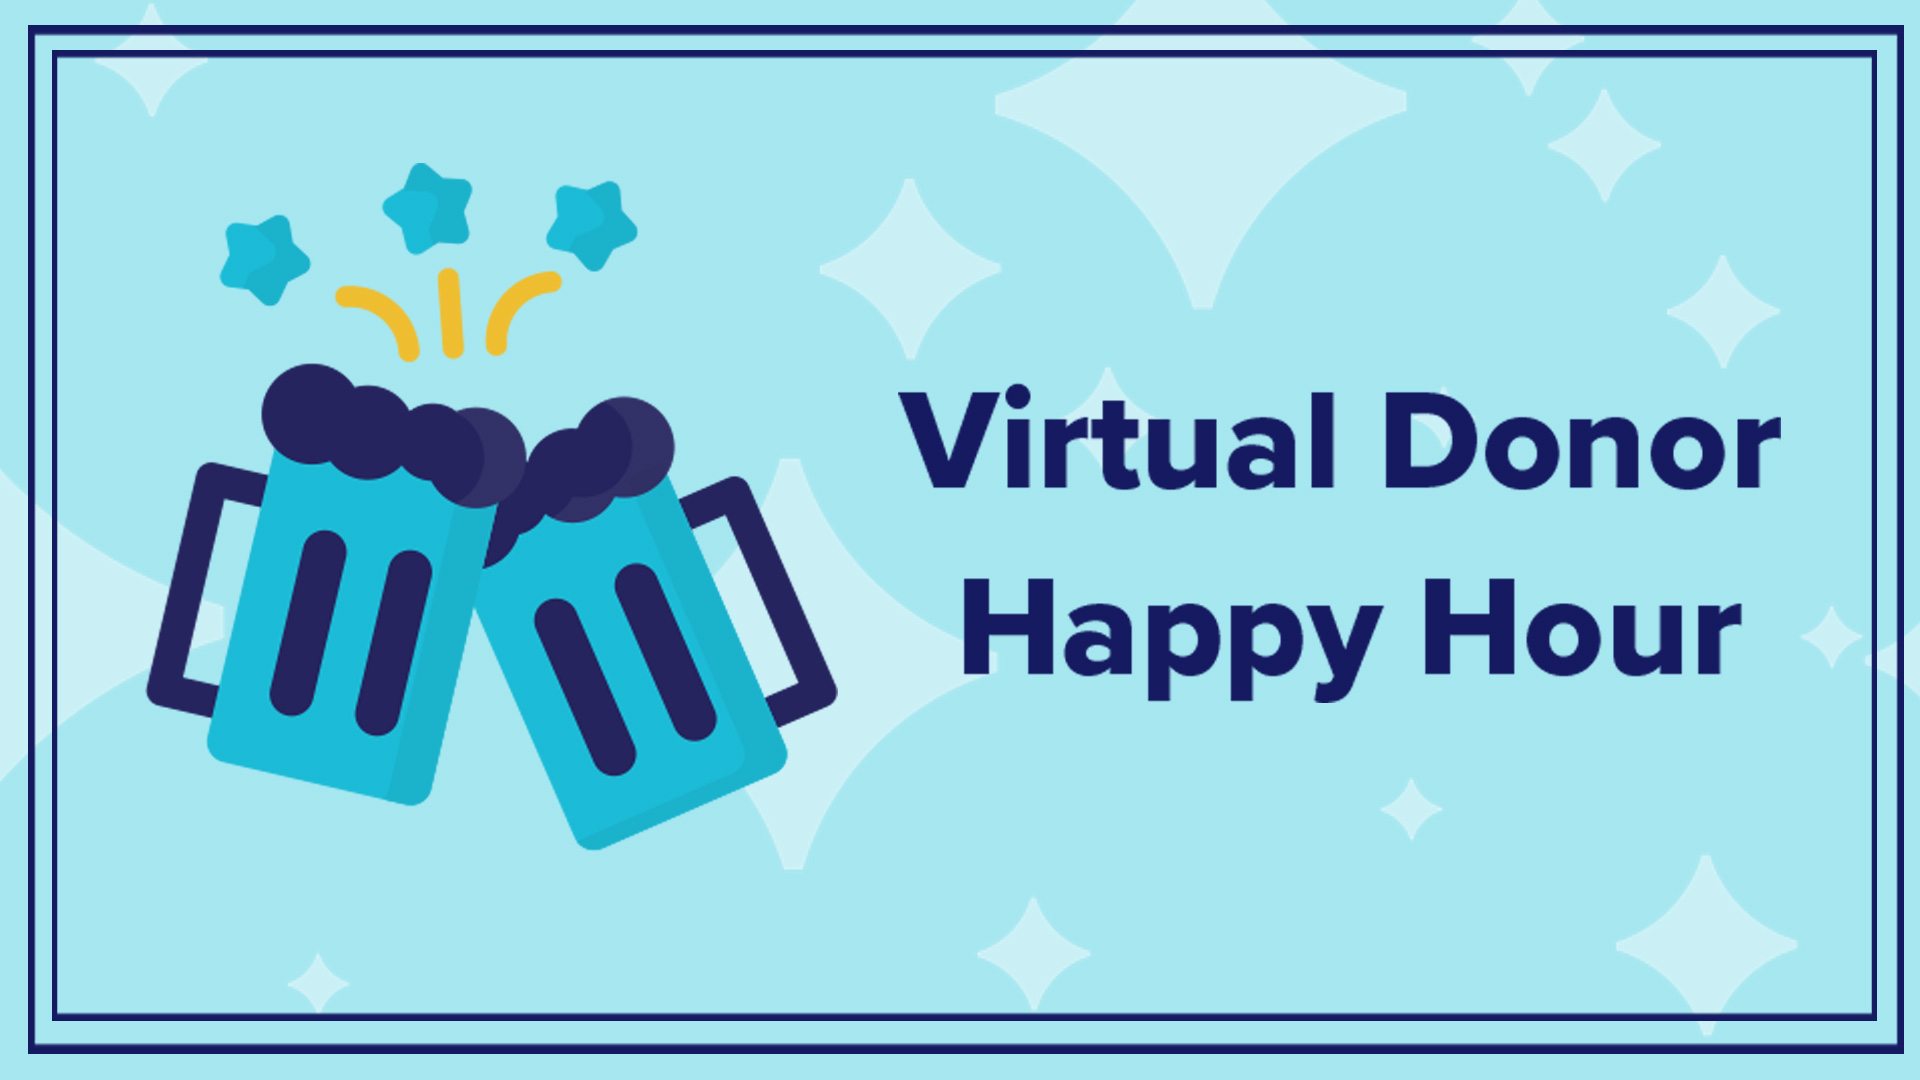 Join us again soon for another Virtual Donor Happy Hour!